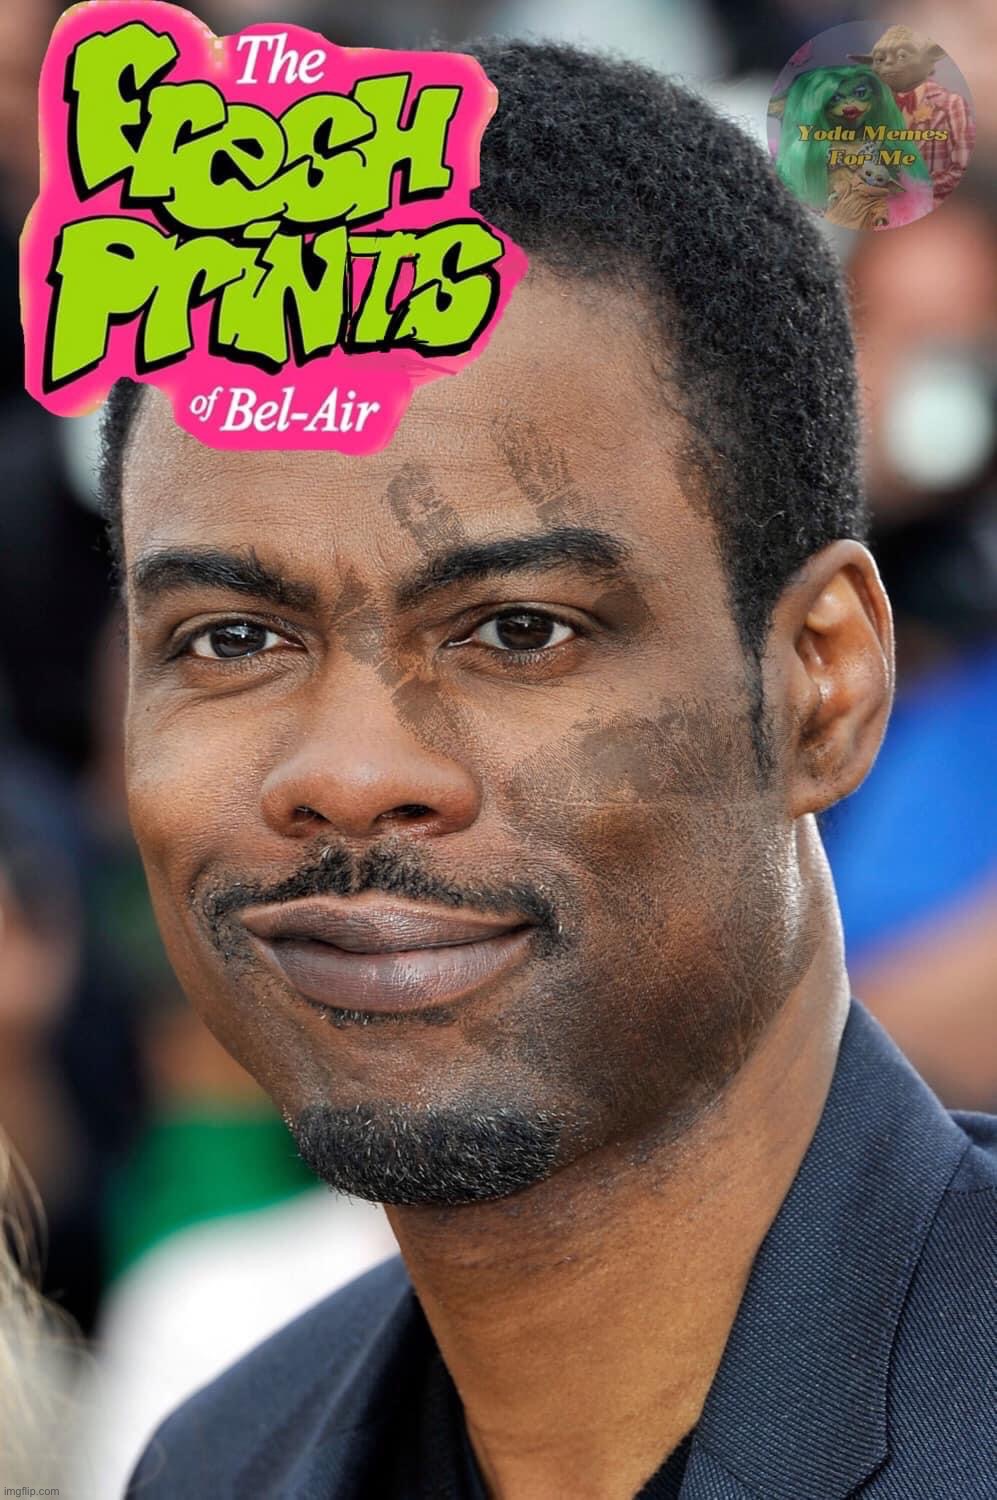 The fresh prints of Bel-Air | image tagged in the fresh prints of bel-air | made w/ Imgflip meme maker